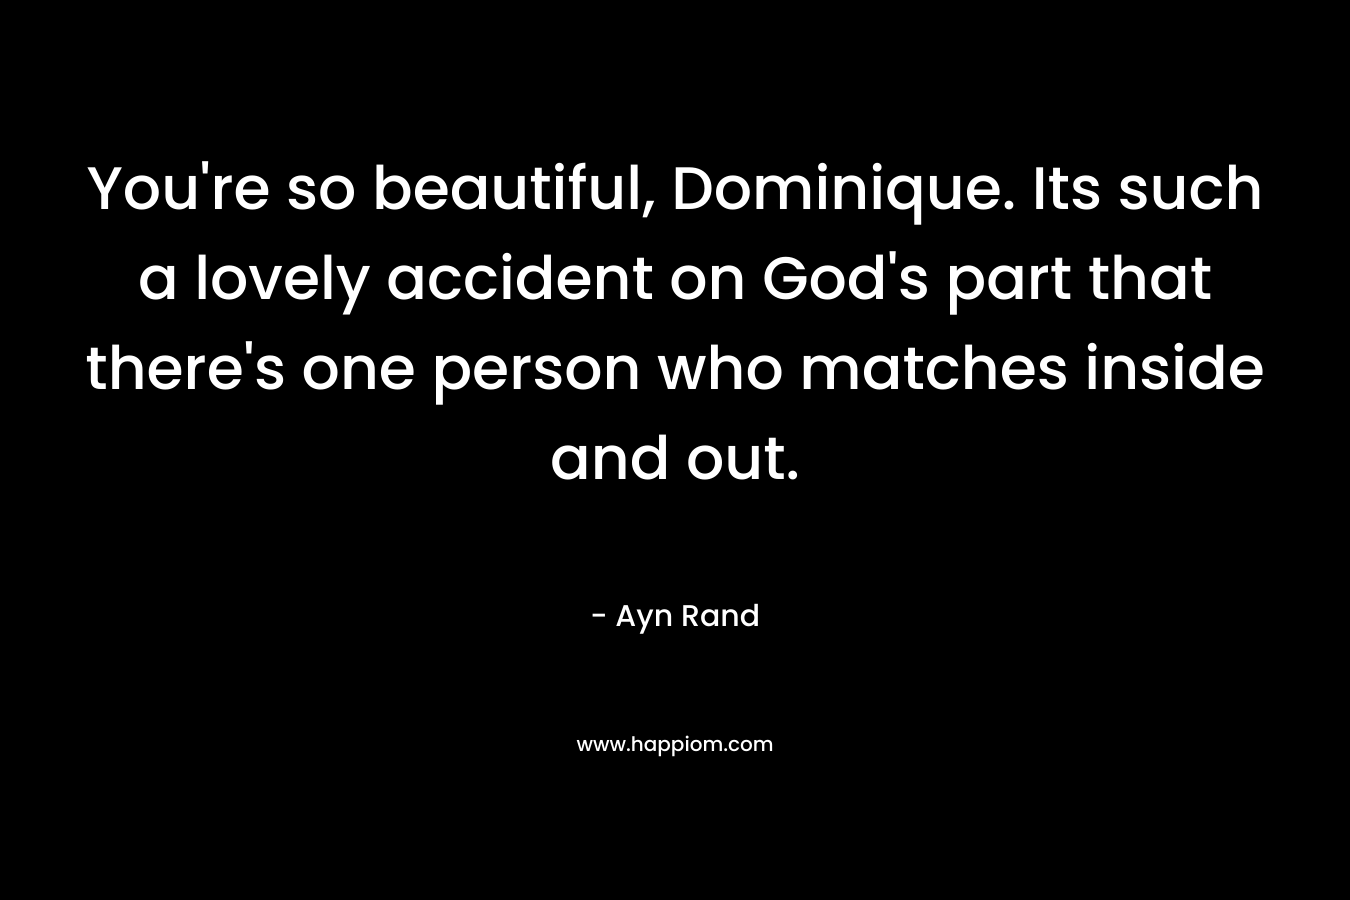 You're so beautiful, Dominique. Its such a lovely accident on God's part that there's one person who matches inside and out.